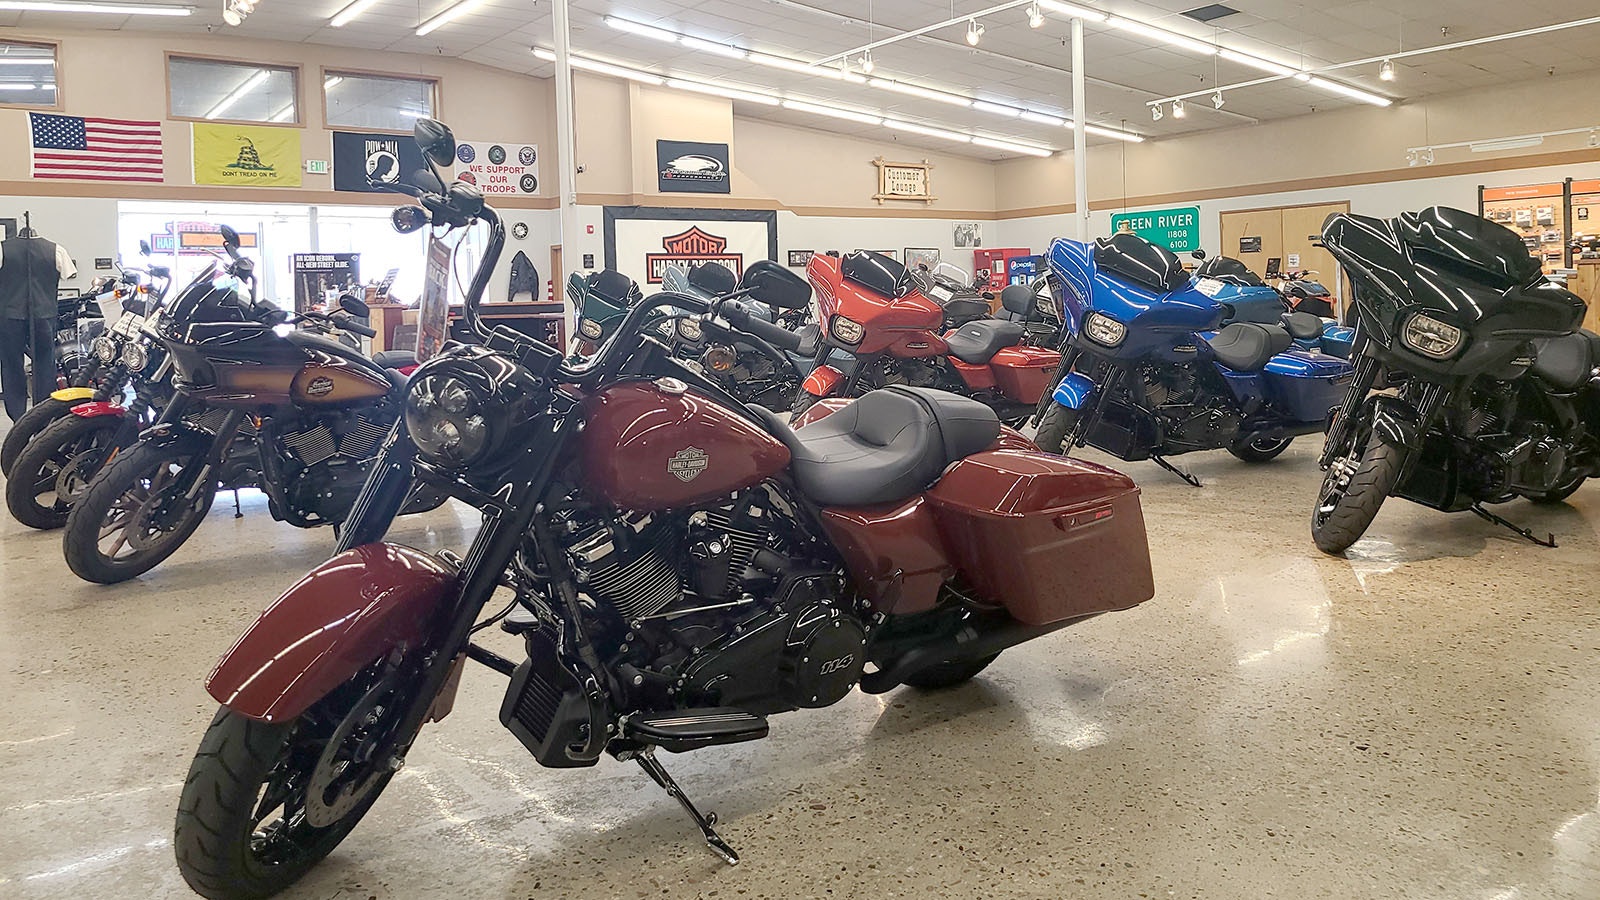 The Flaming Gorge Harely-Davidson dealership in Green River is set be the final stop for the “Hogs for Hope” motorcycle rally on Saturday, before the group heads to Daniel the next morning. They rally is in honor of a wolf that was tortured and killed in Daniel.